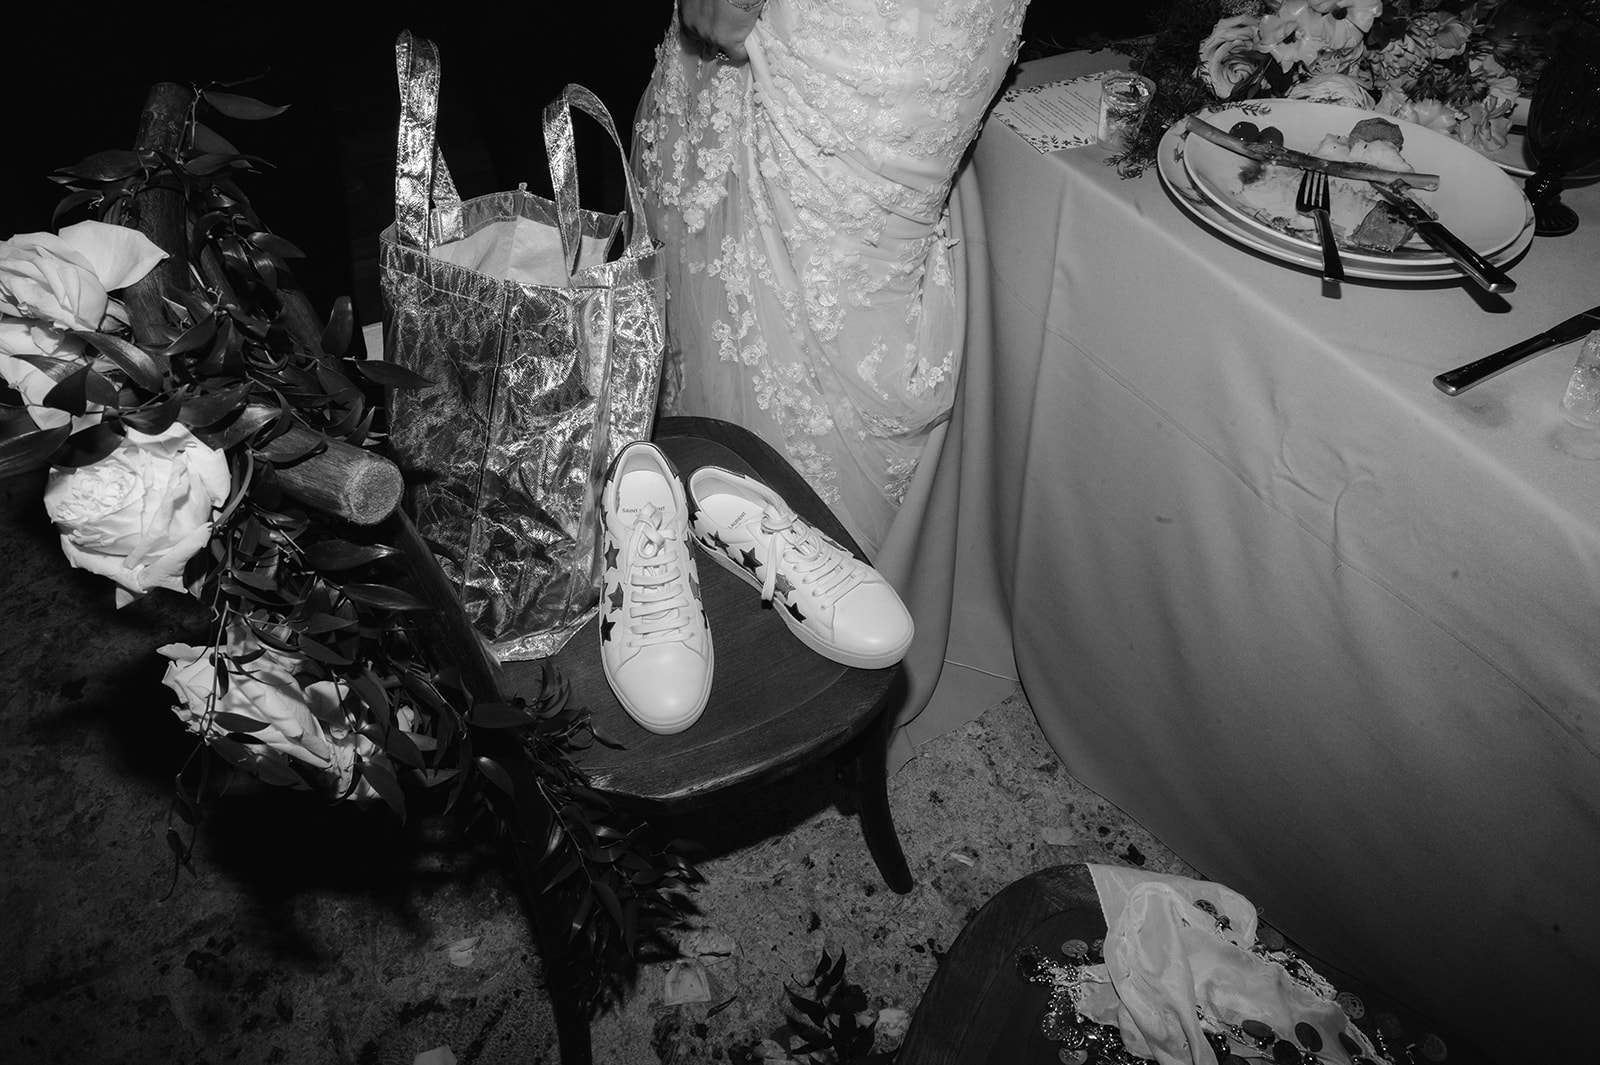 Bride changing into sneakers for the dance party.